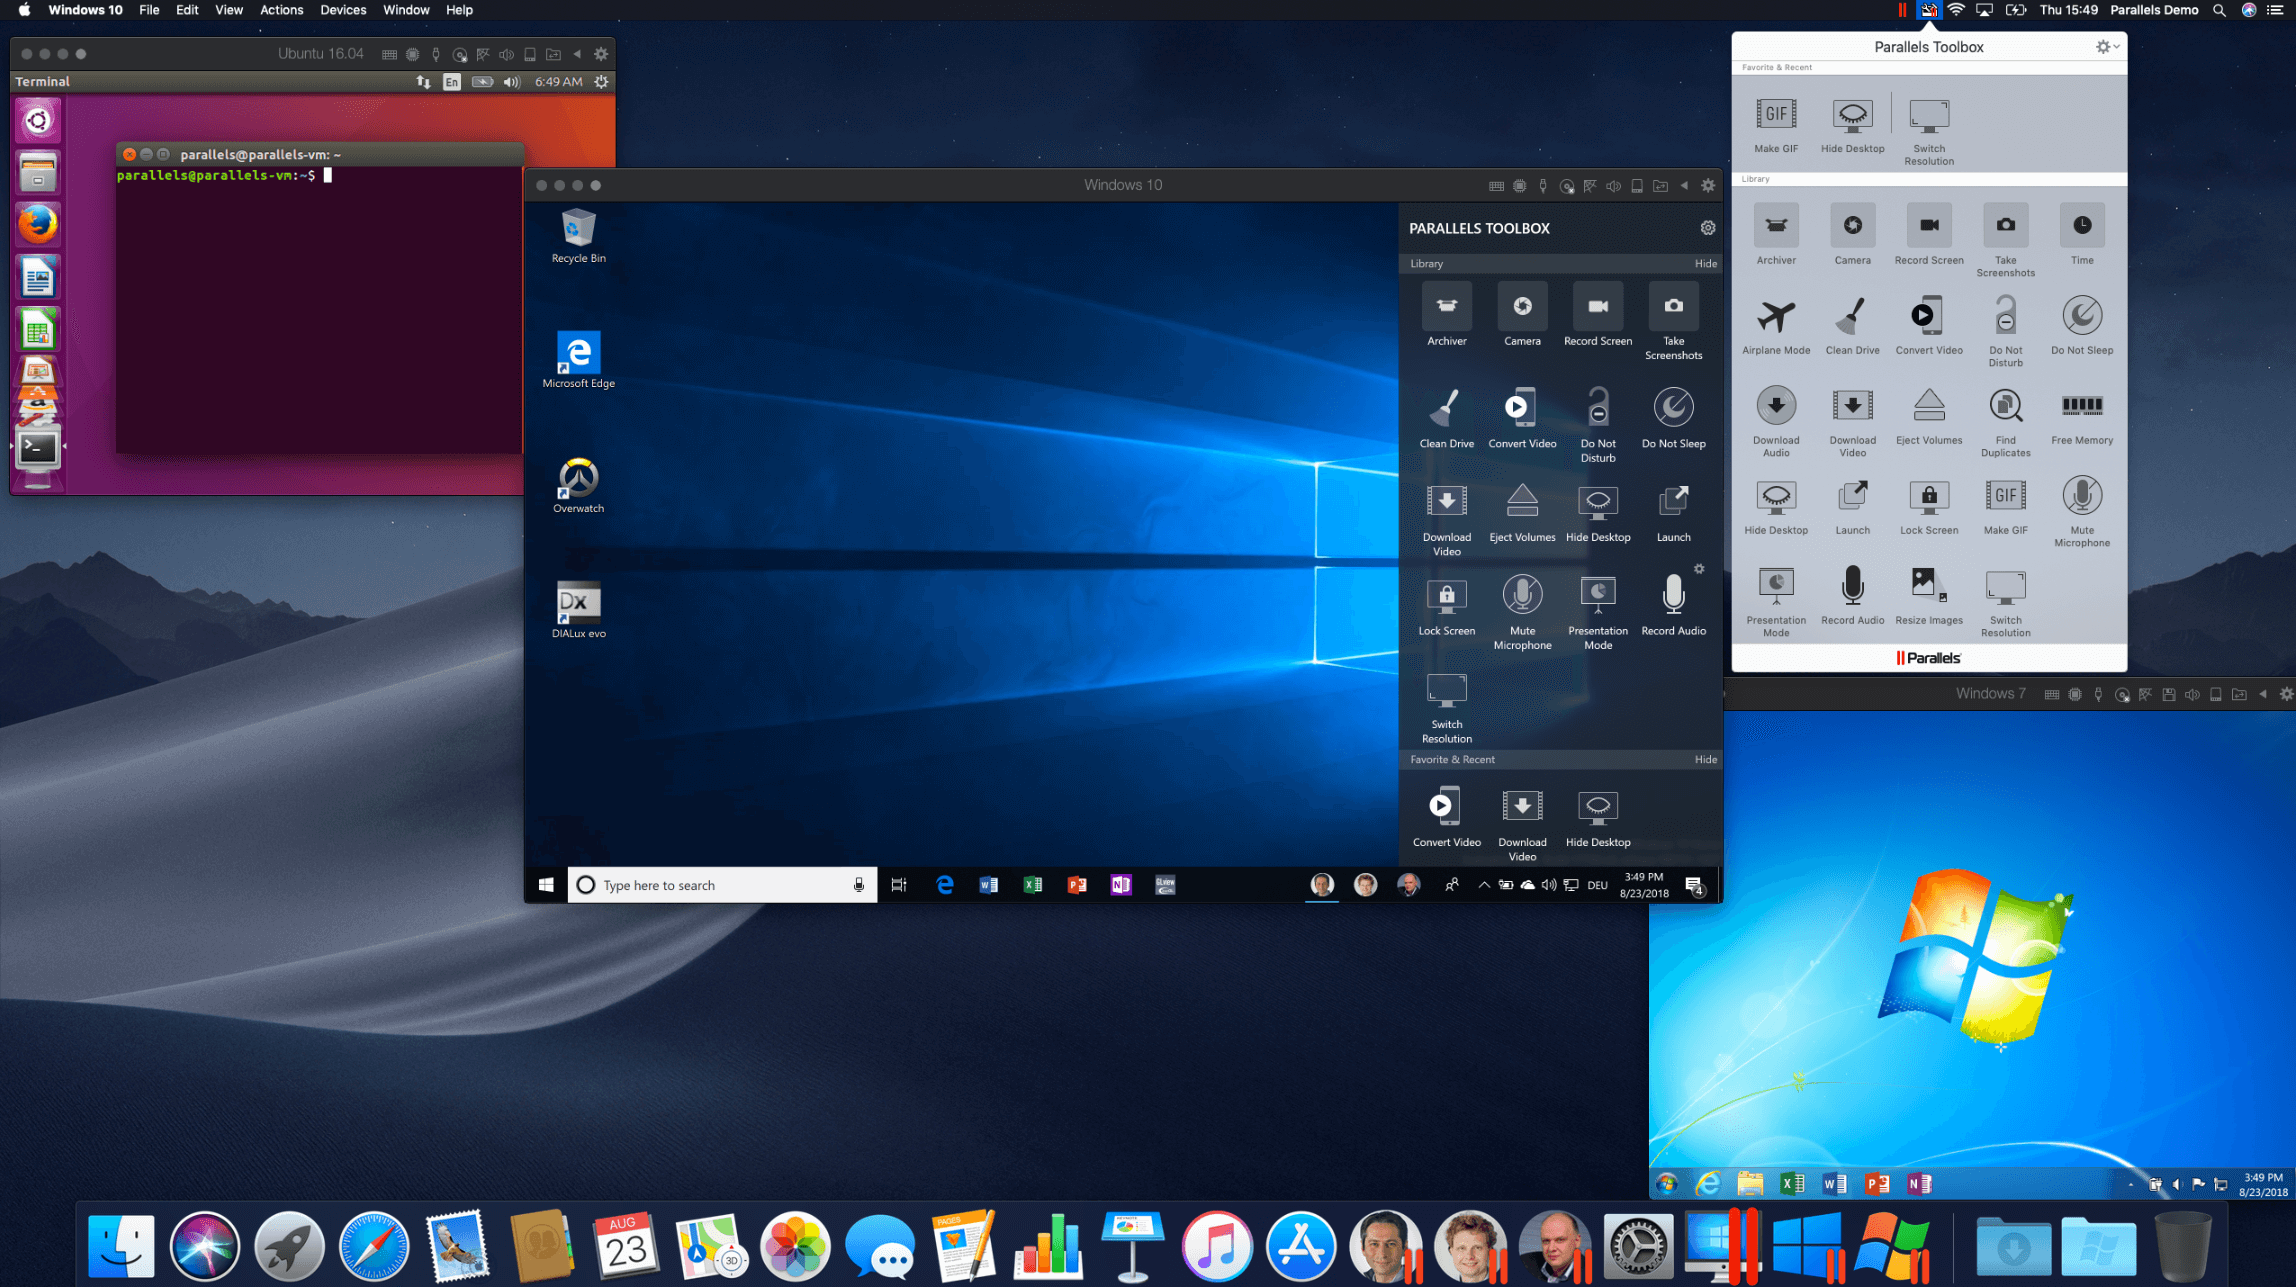 Running parallels on a mac